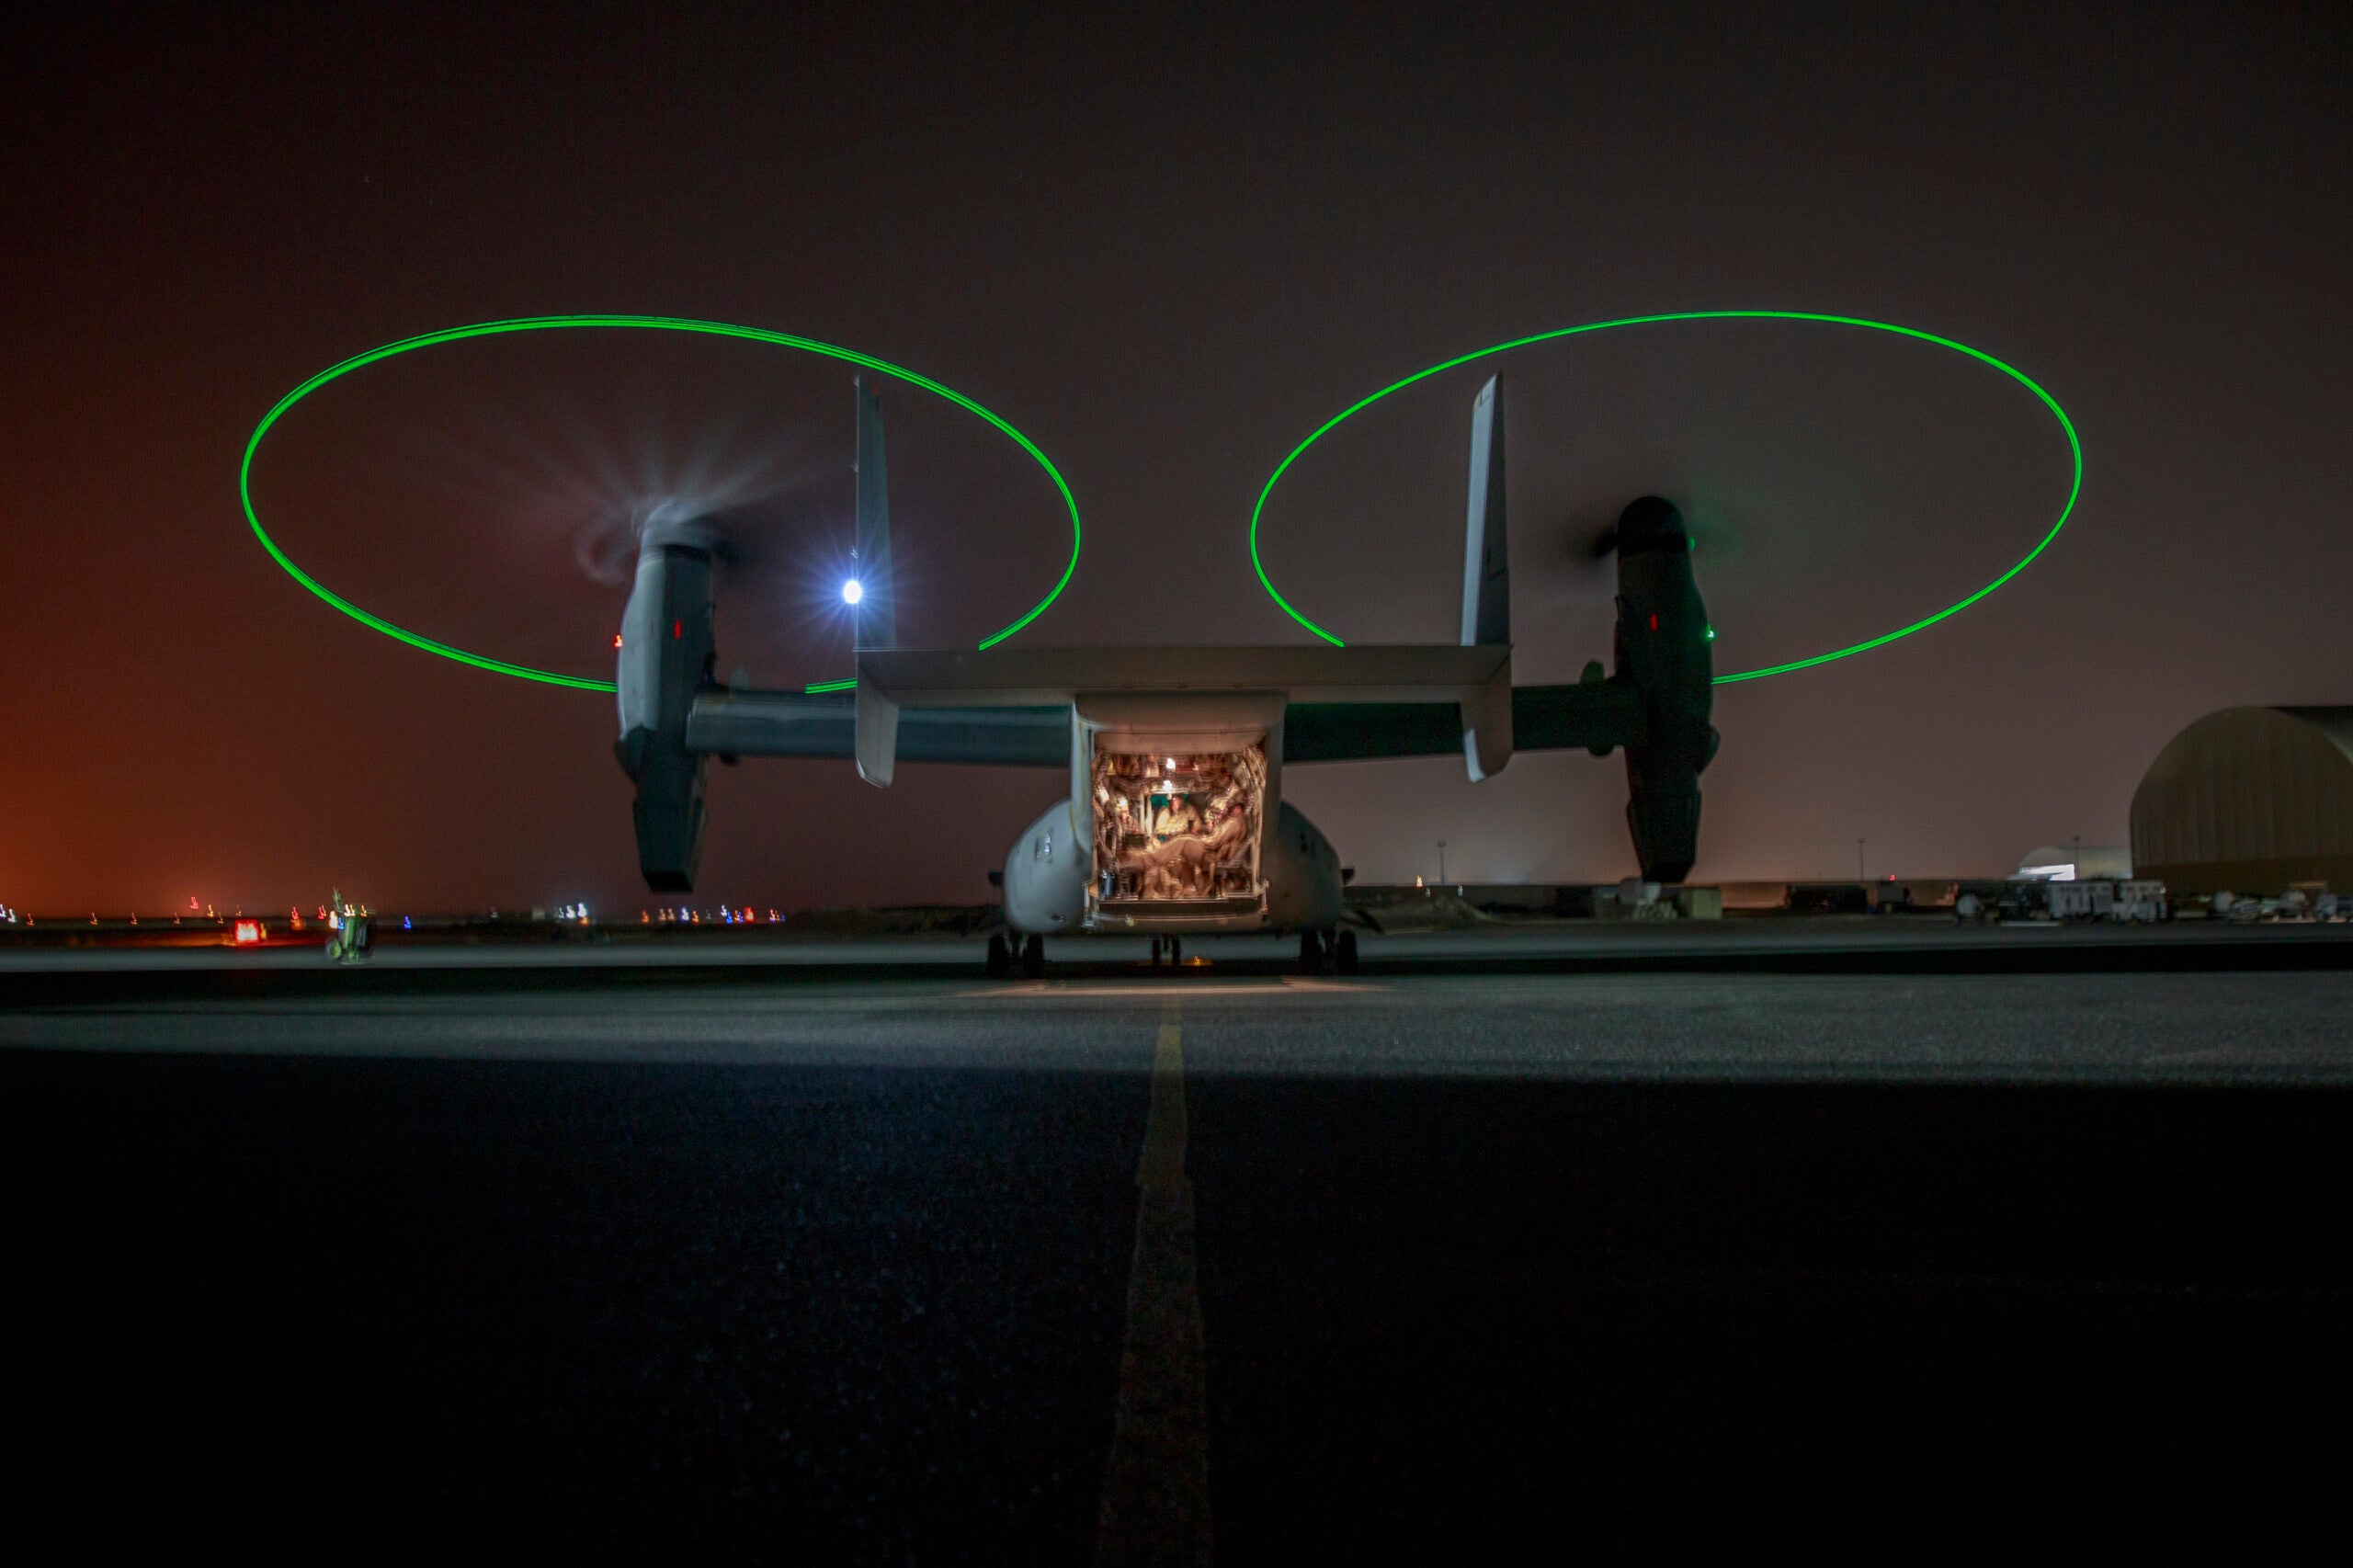 UNDISCLOSED LOCATION, MIDDLE EAST – An MV-22 Osprey with Marine Medium Tilt-rotor Squadron 164 loaded with Marines attached to 3rd Battalion 7th Marine Regiment prepare to execute a tactical recovery of aircraft and personnel (TRAP) exercise July 8, 2018. The exercise simulated the rescue of two downed pilots in a night time environment. (U.S. Marine Corps photo by Cpl. Gabino Perez)